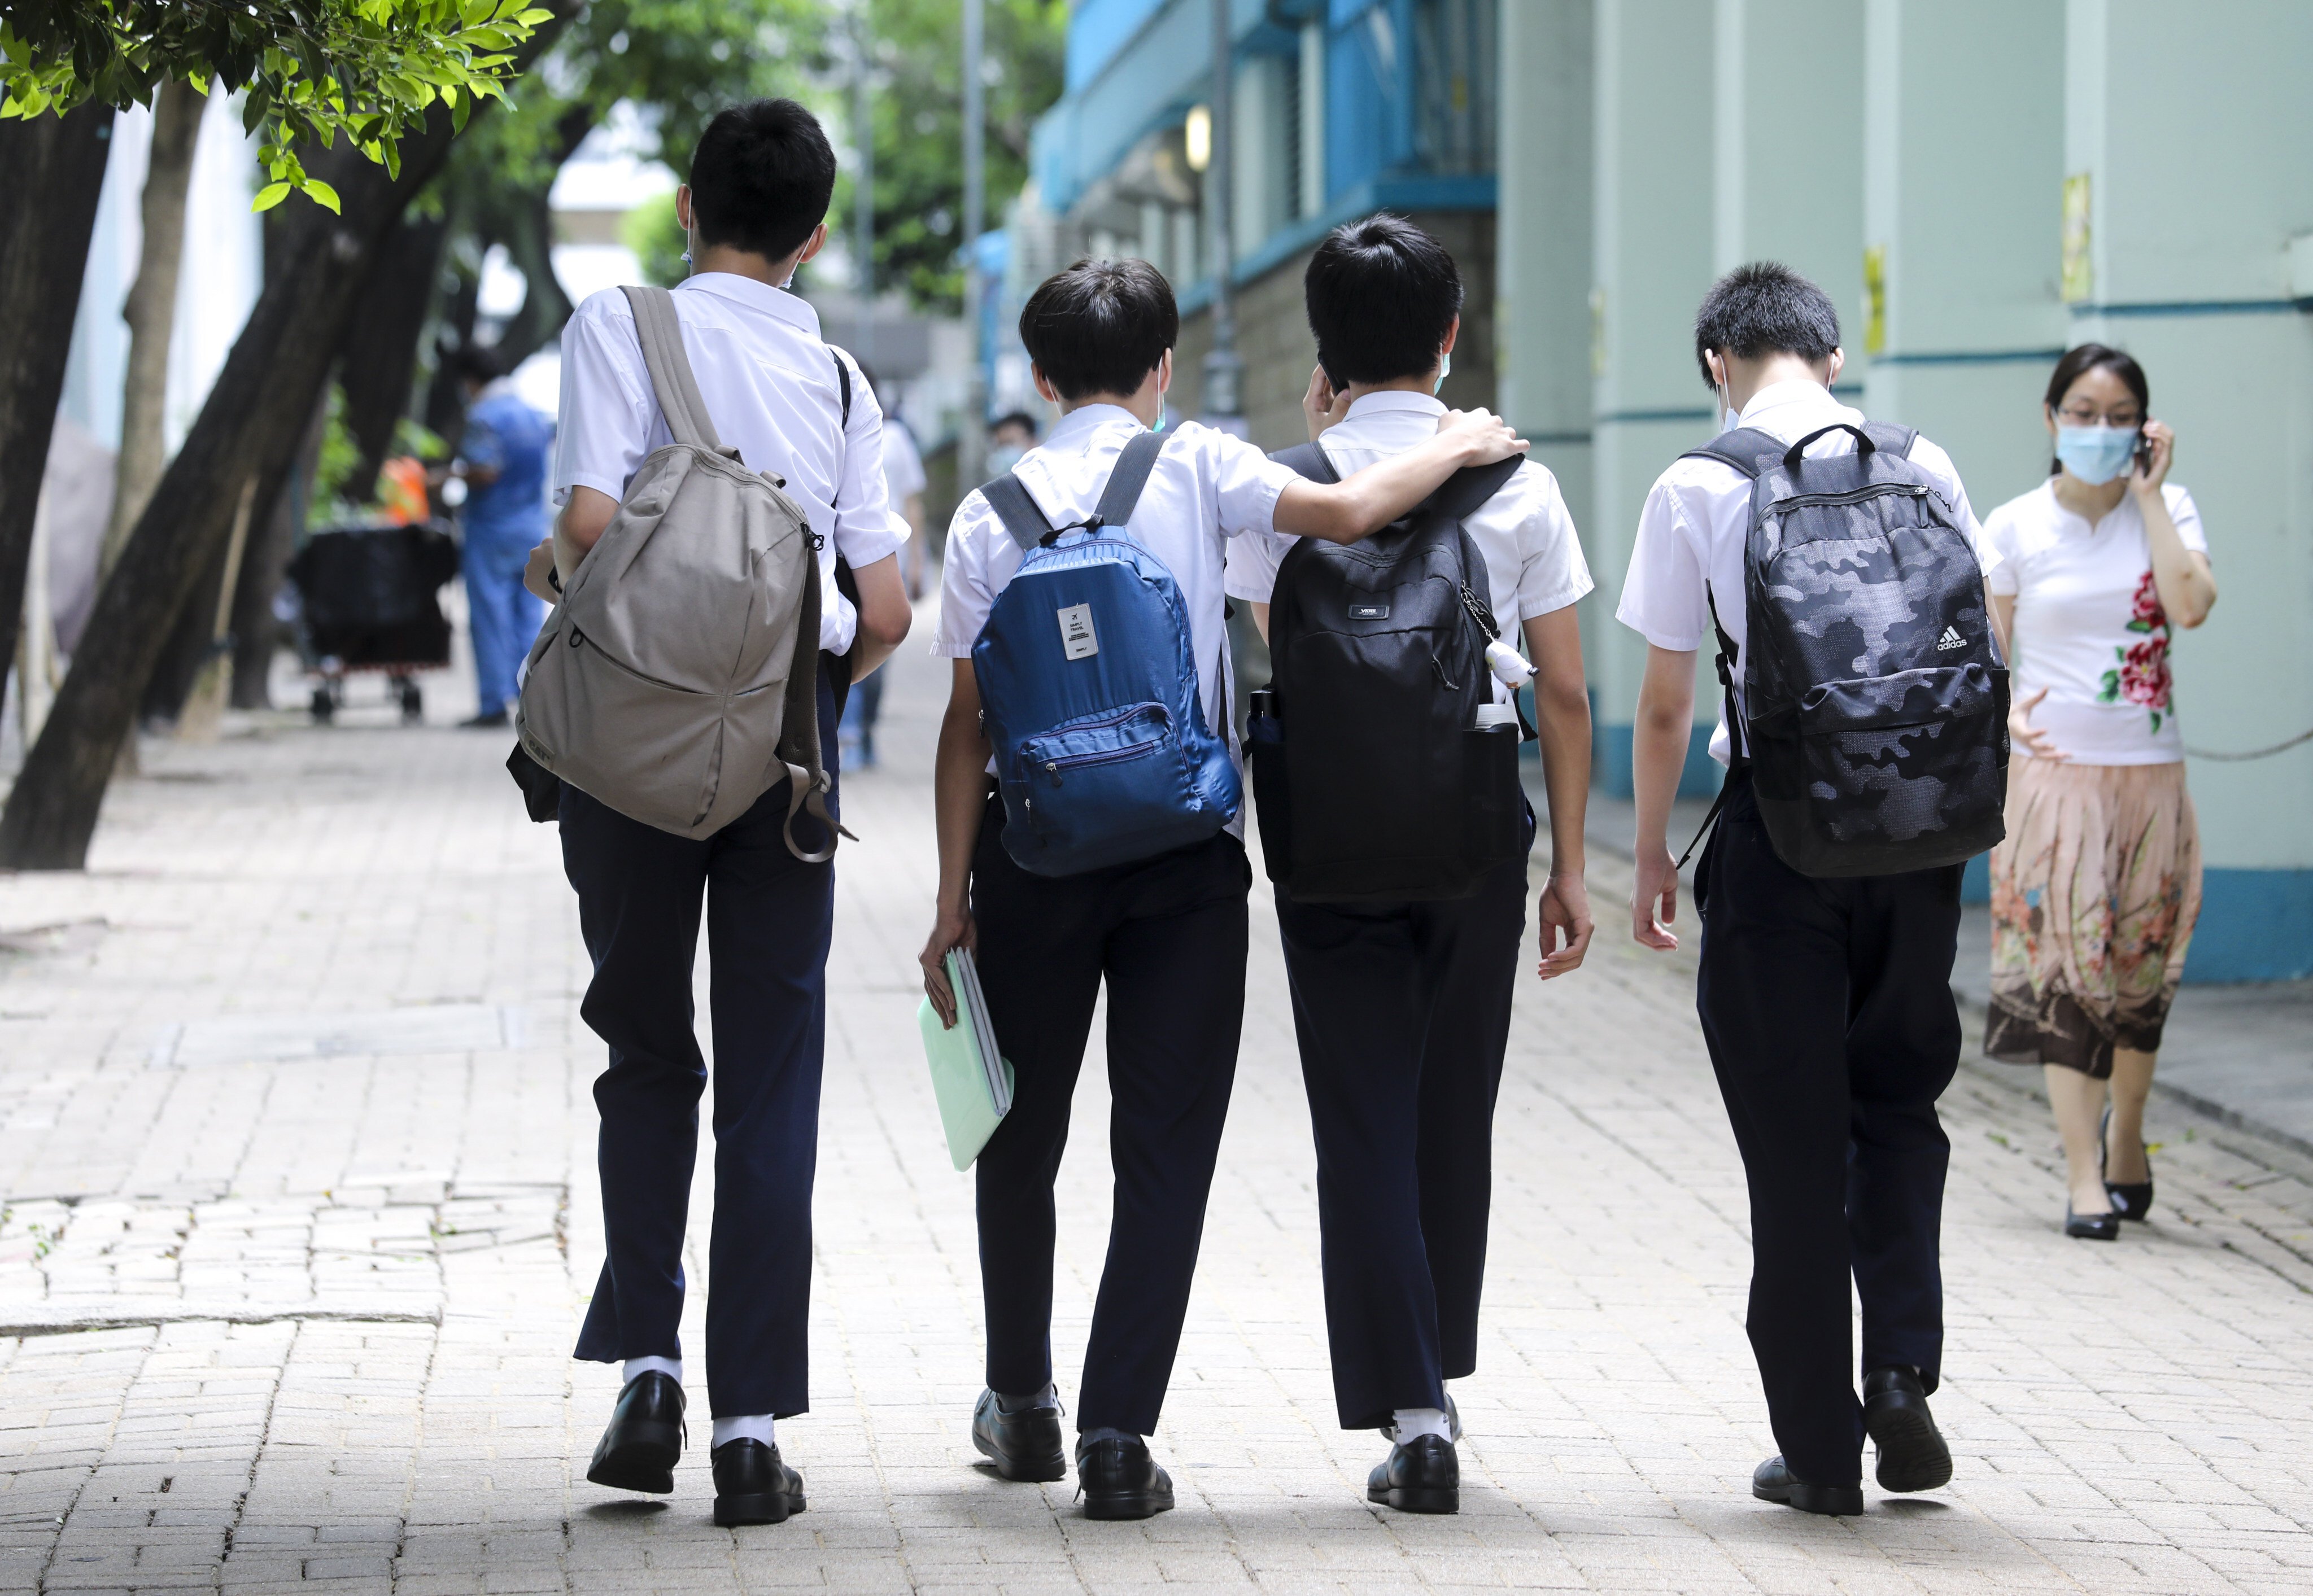 A drop in the number of pupils enrolling in Hong Kong’s schools could mean closures are inevitable. Photo: SCMP / Dickson Lee